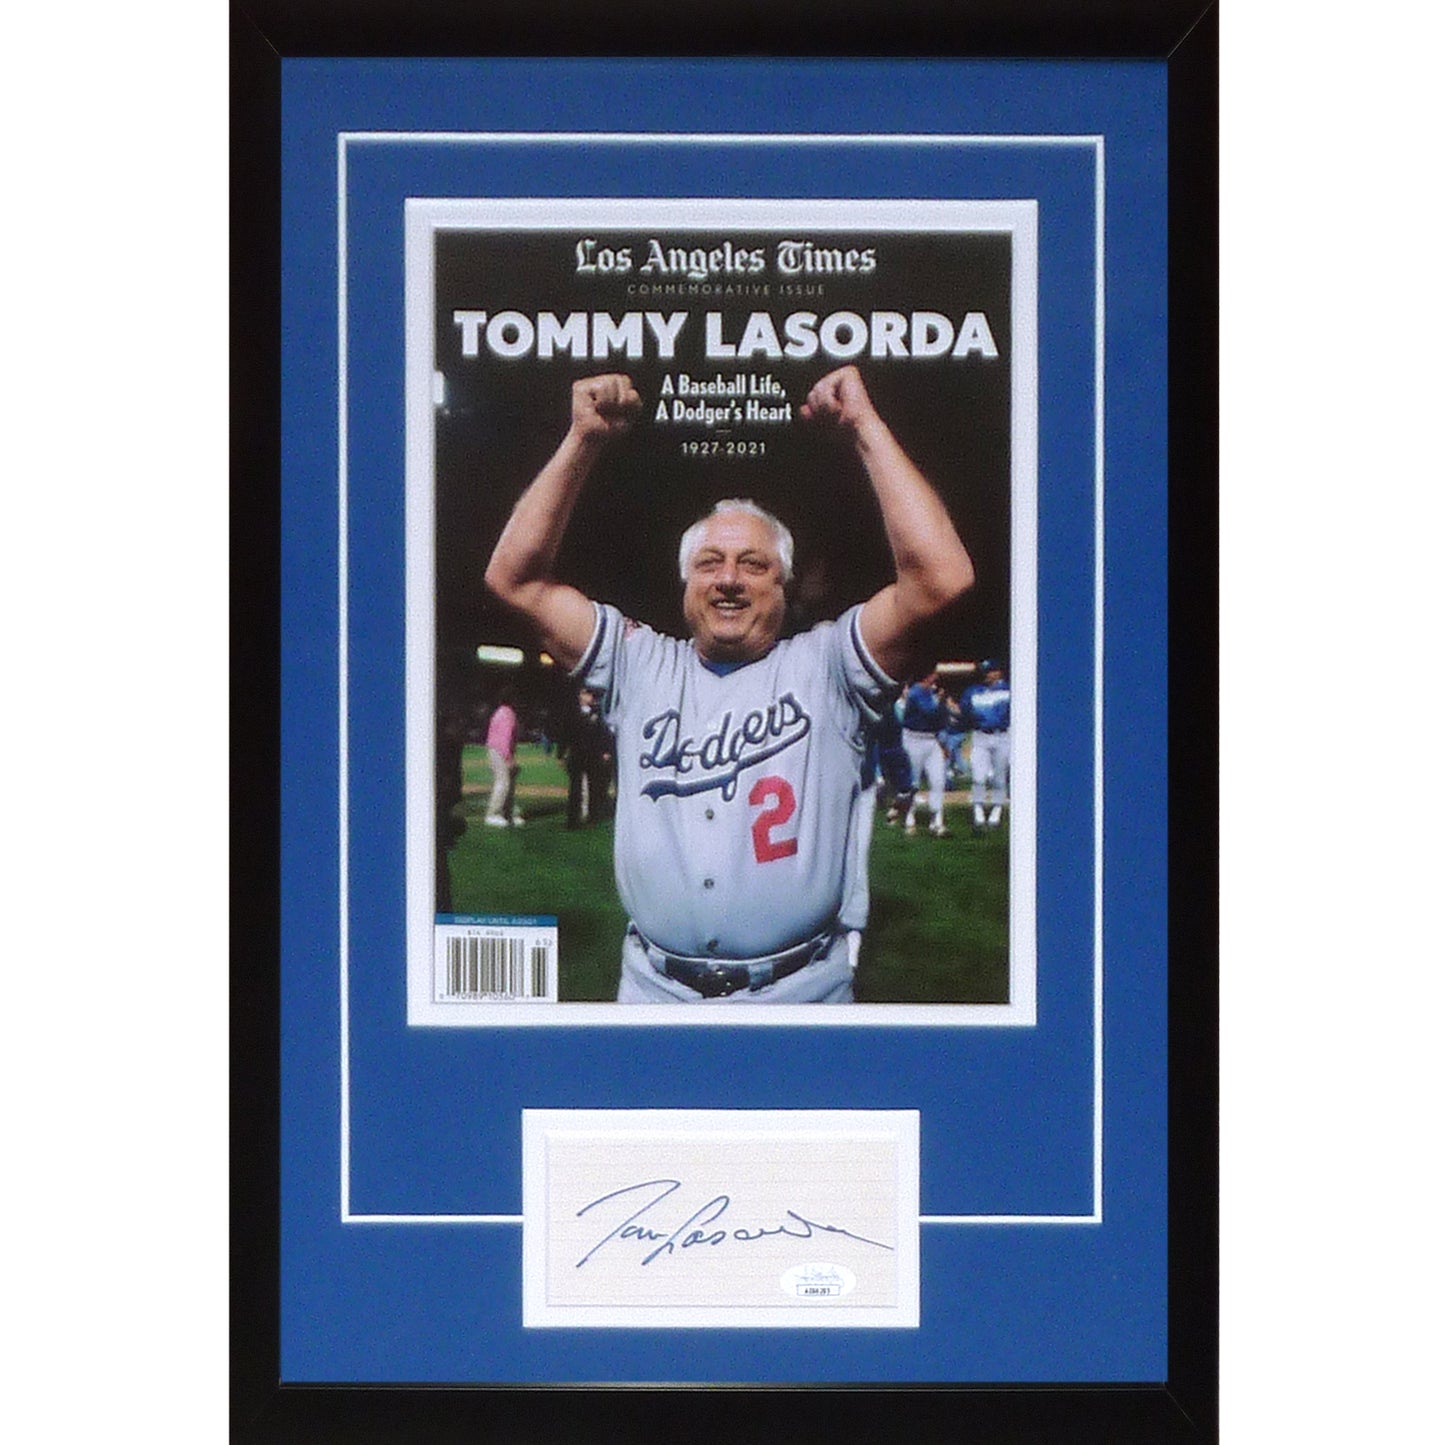 Tommy Lasorda Autographed Los Angeles Dodgers Deluxe Framed Piece with Los Angeles Times Commemorative Issue - JSA